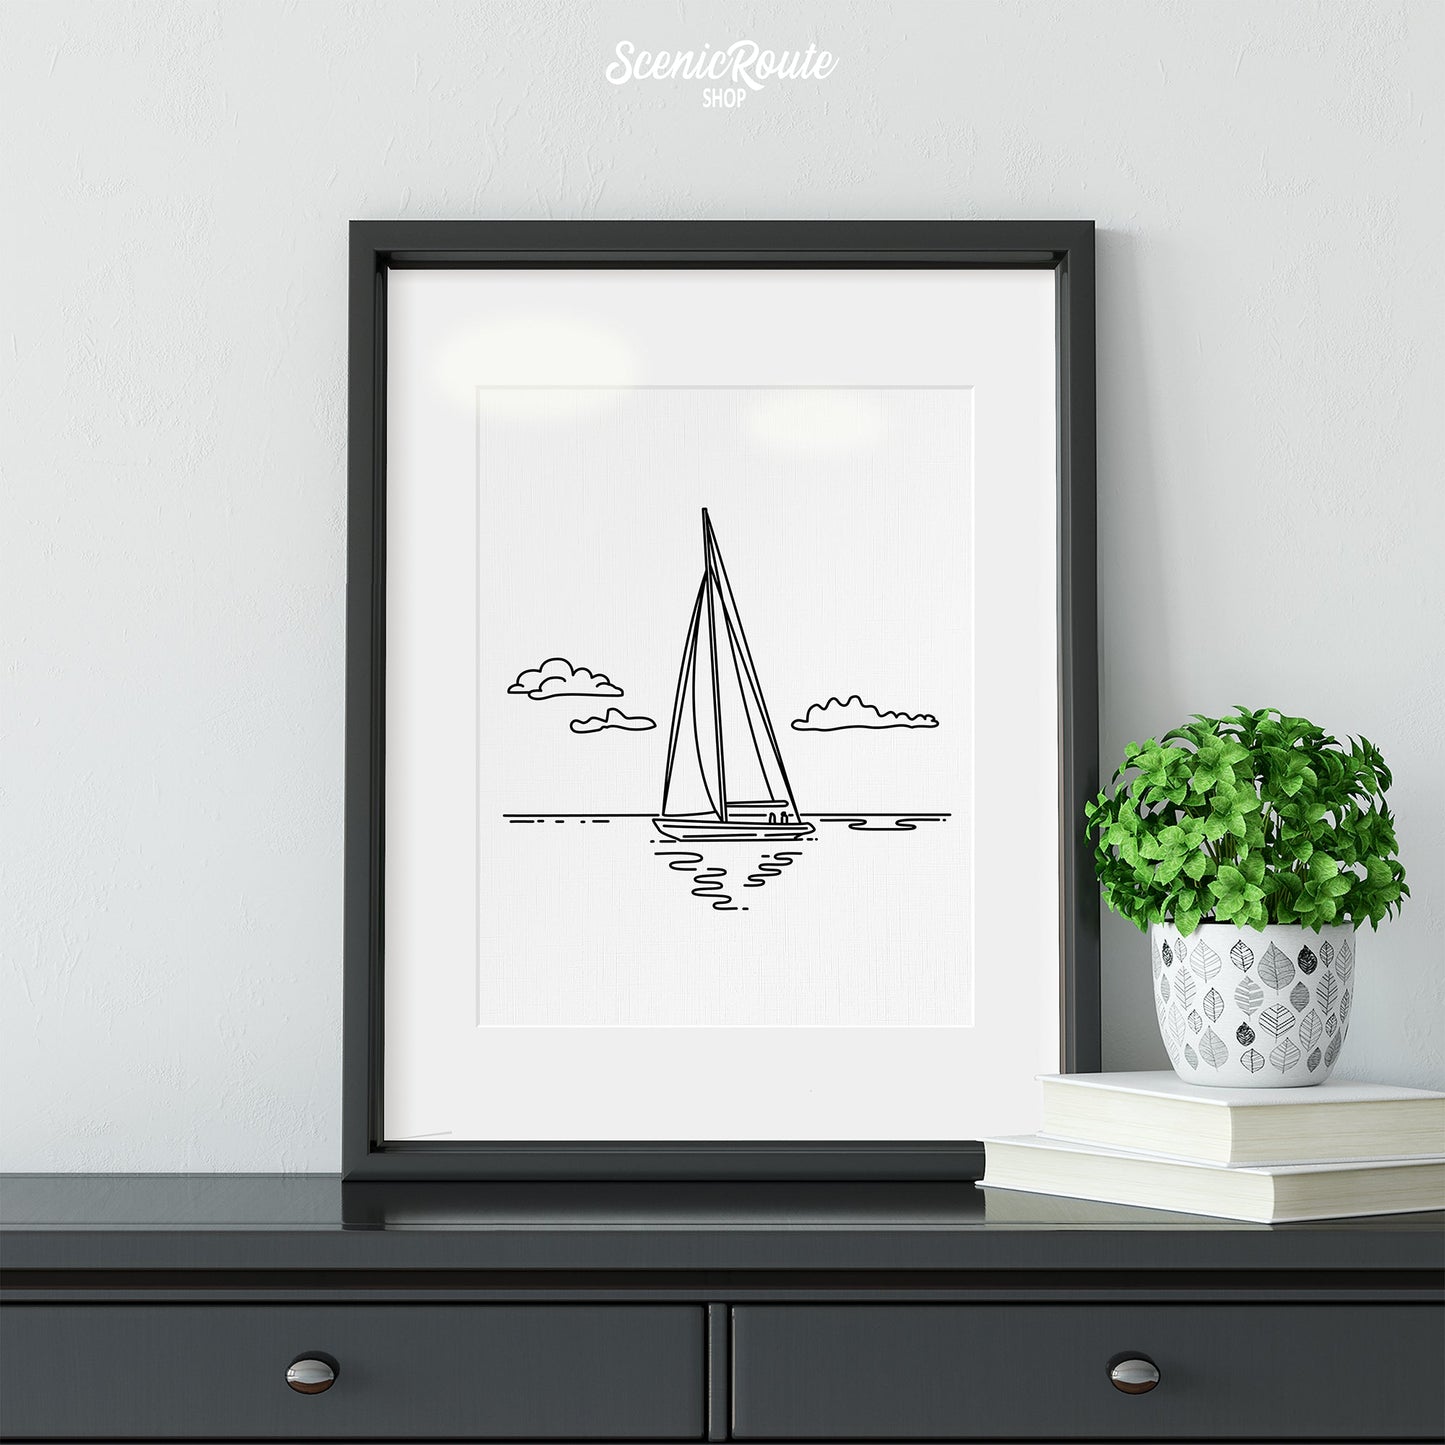 A framed line art drawing of Sailing on a gray dresser with a plant